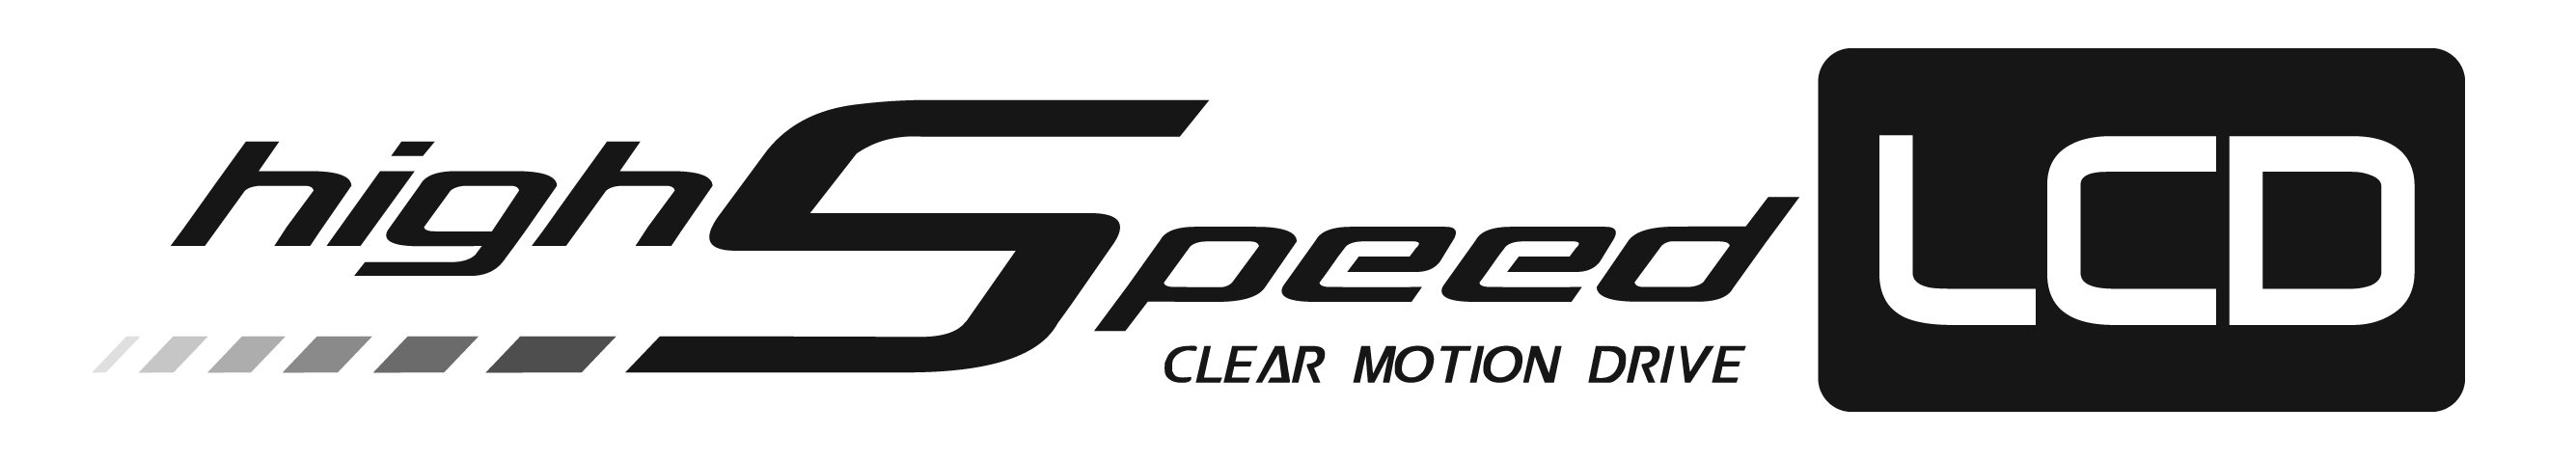 Trademark Logo HIGH SPEED LCD CLEAR MOTION DRIVE